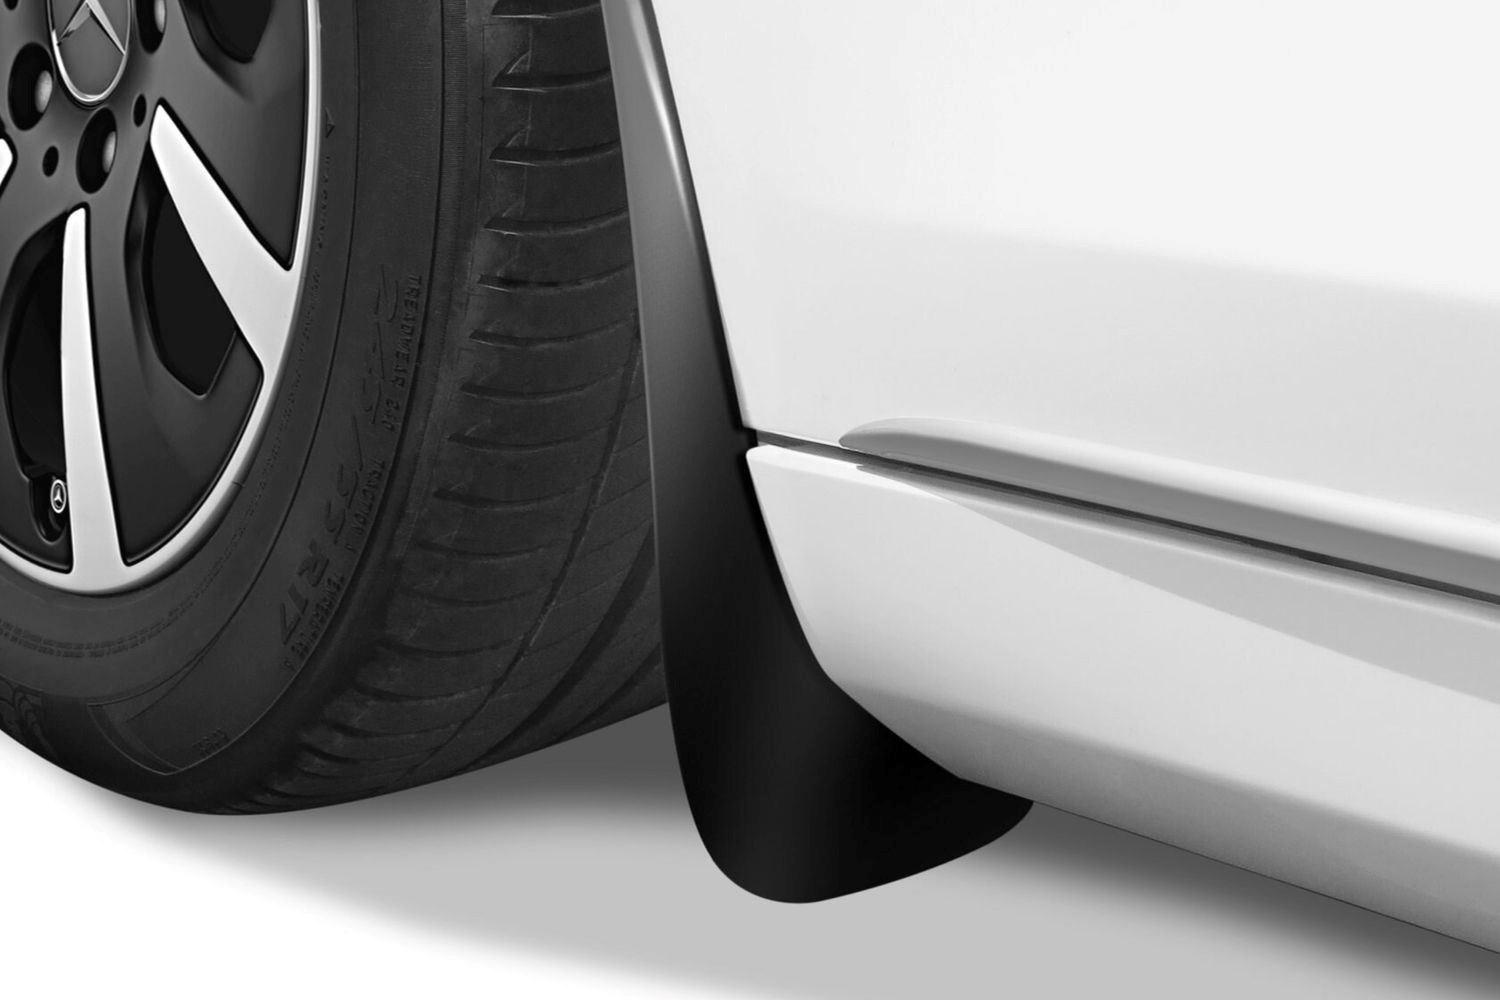 Close-up image of mud flaps on a new Mercedes-Benz vehicle